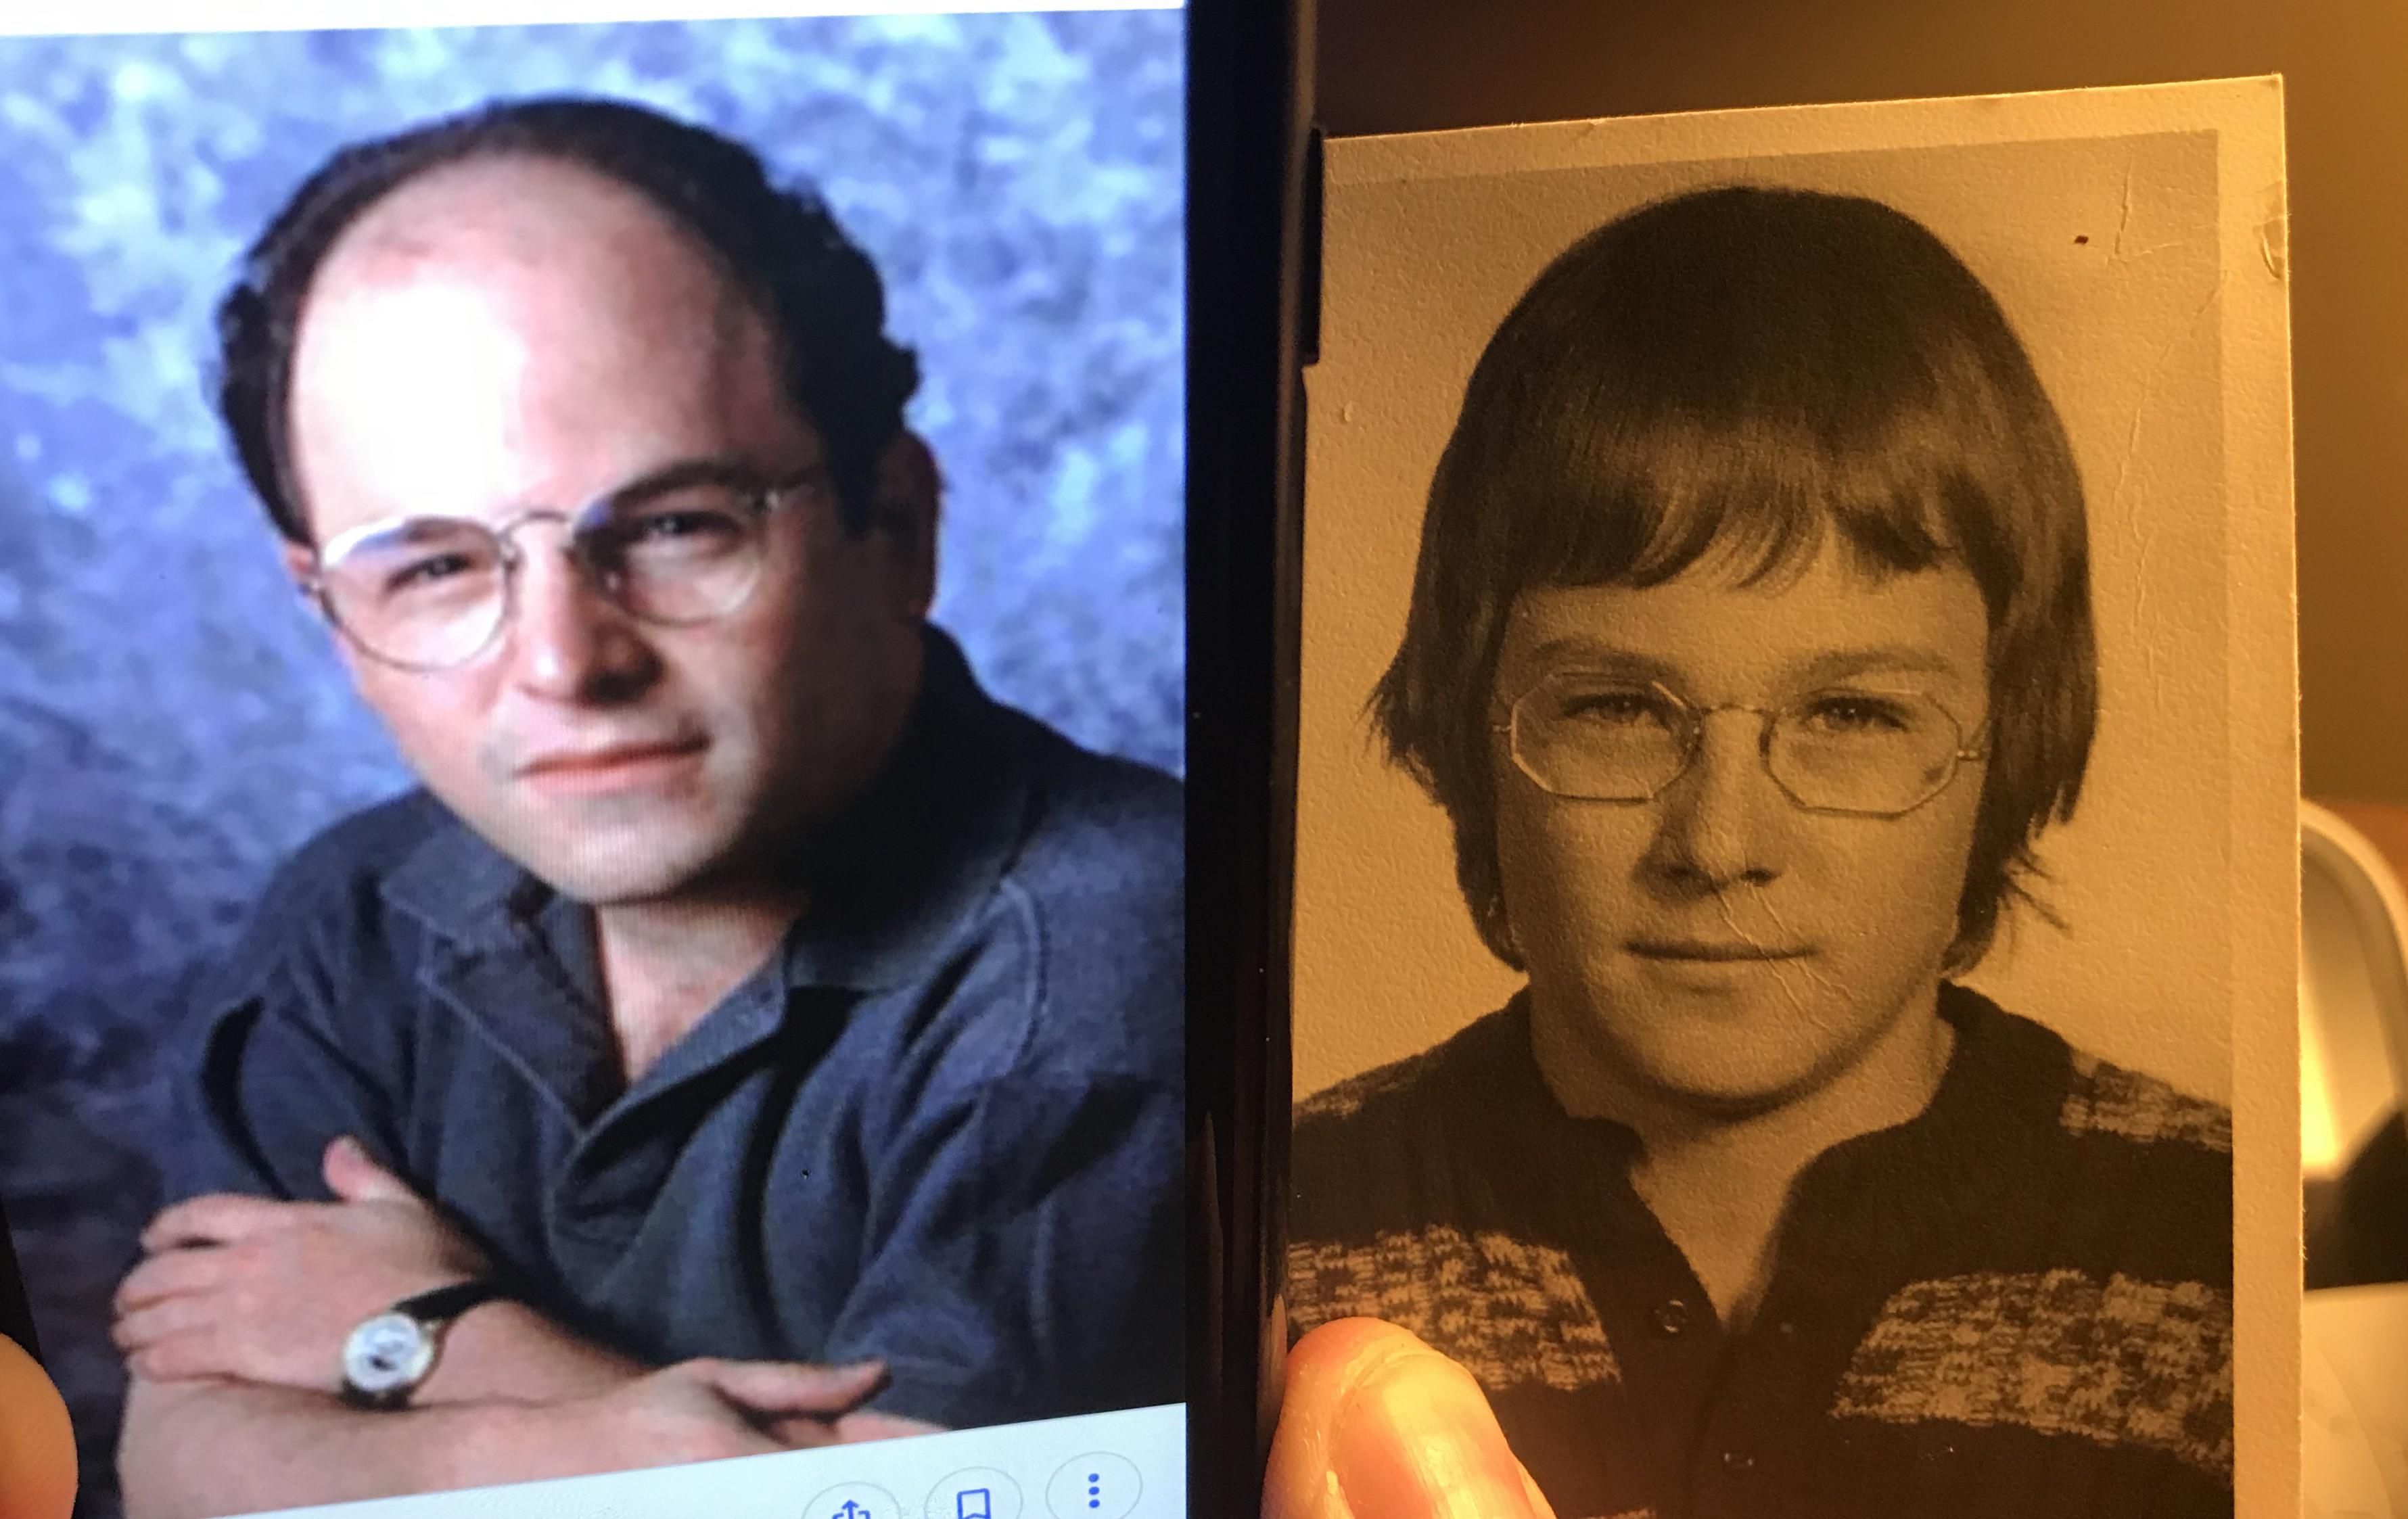 Is my dad George Costanza?